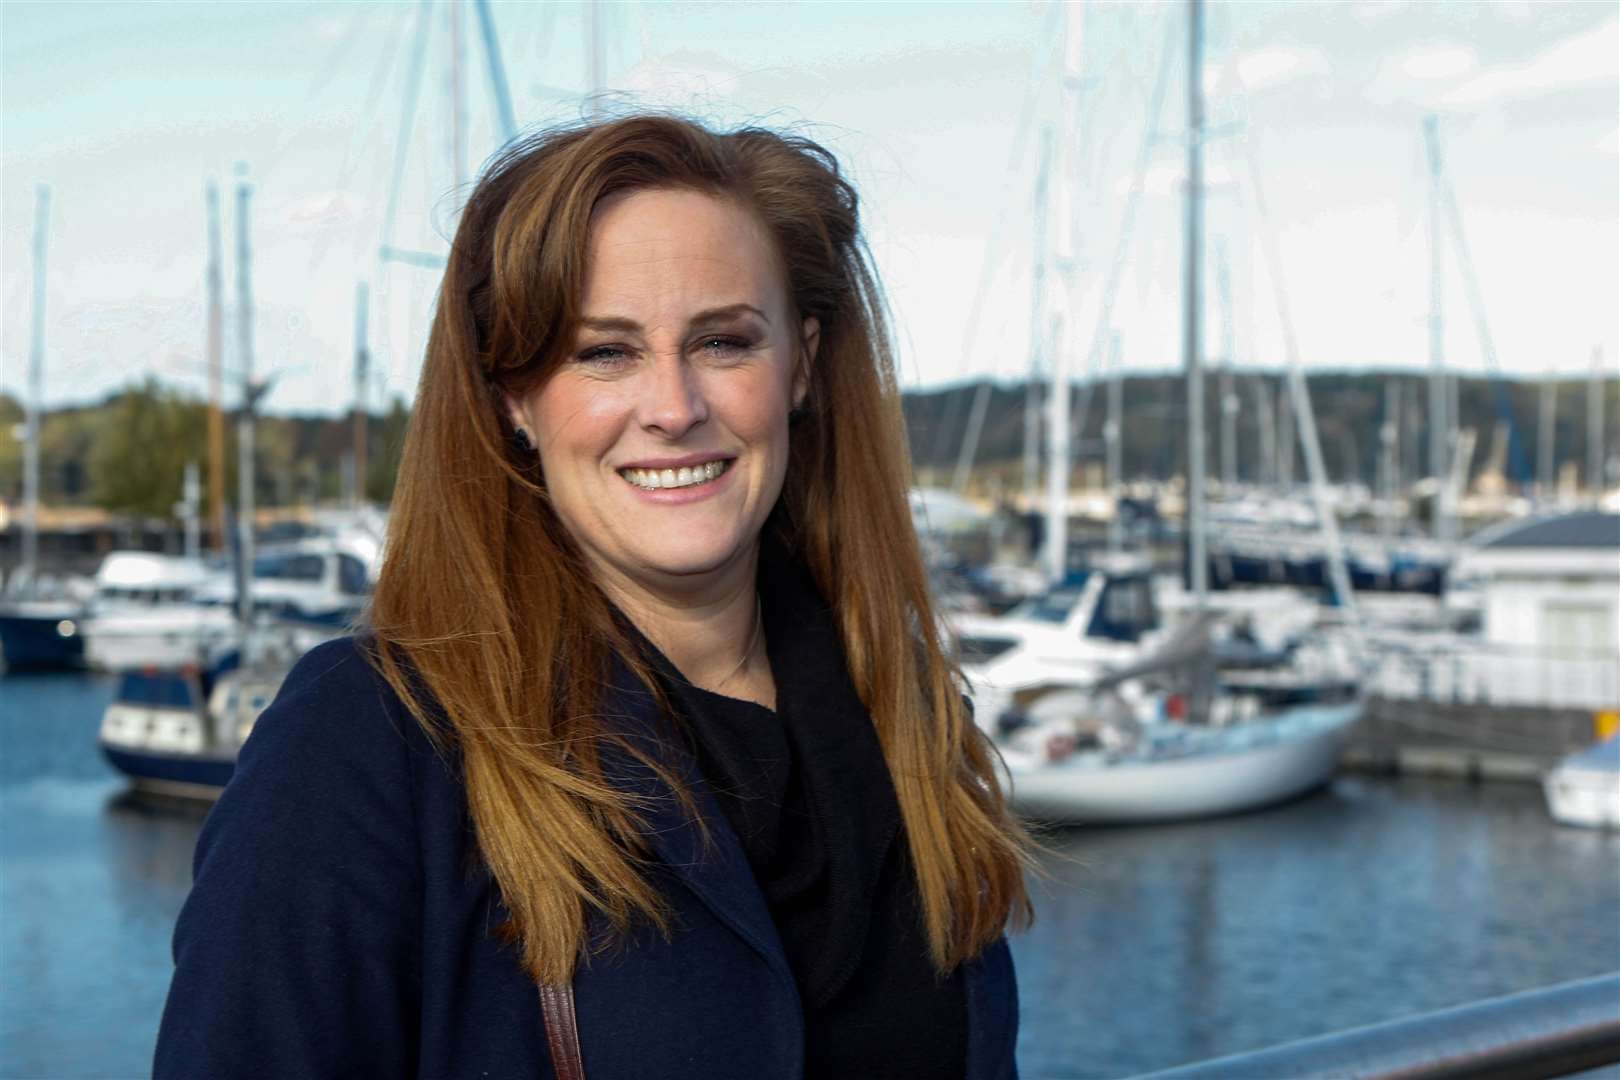 MP Kelly Tolhurst raised the issue of the closure threat for businesses at Chatham Dock in parliament on Thursday